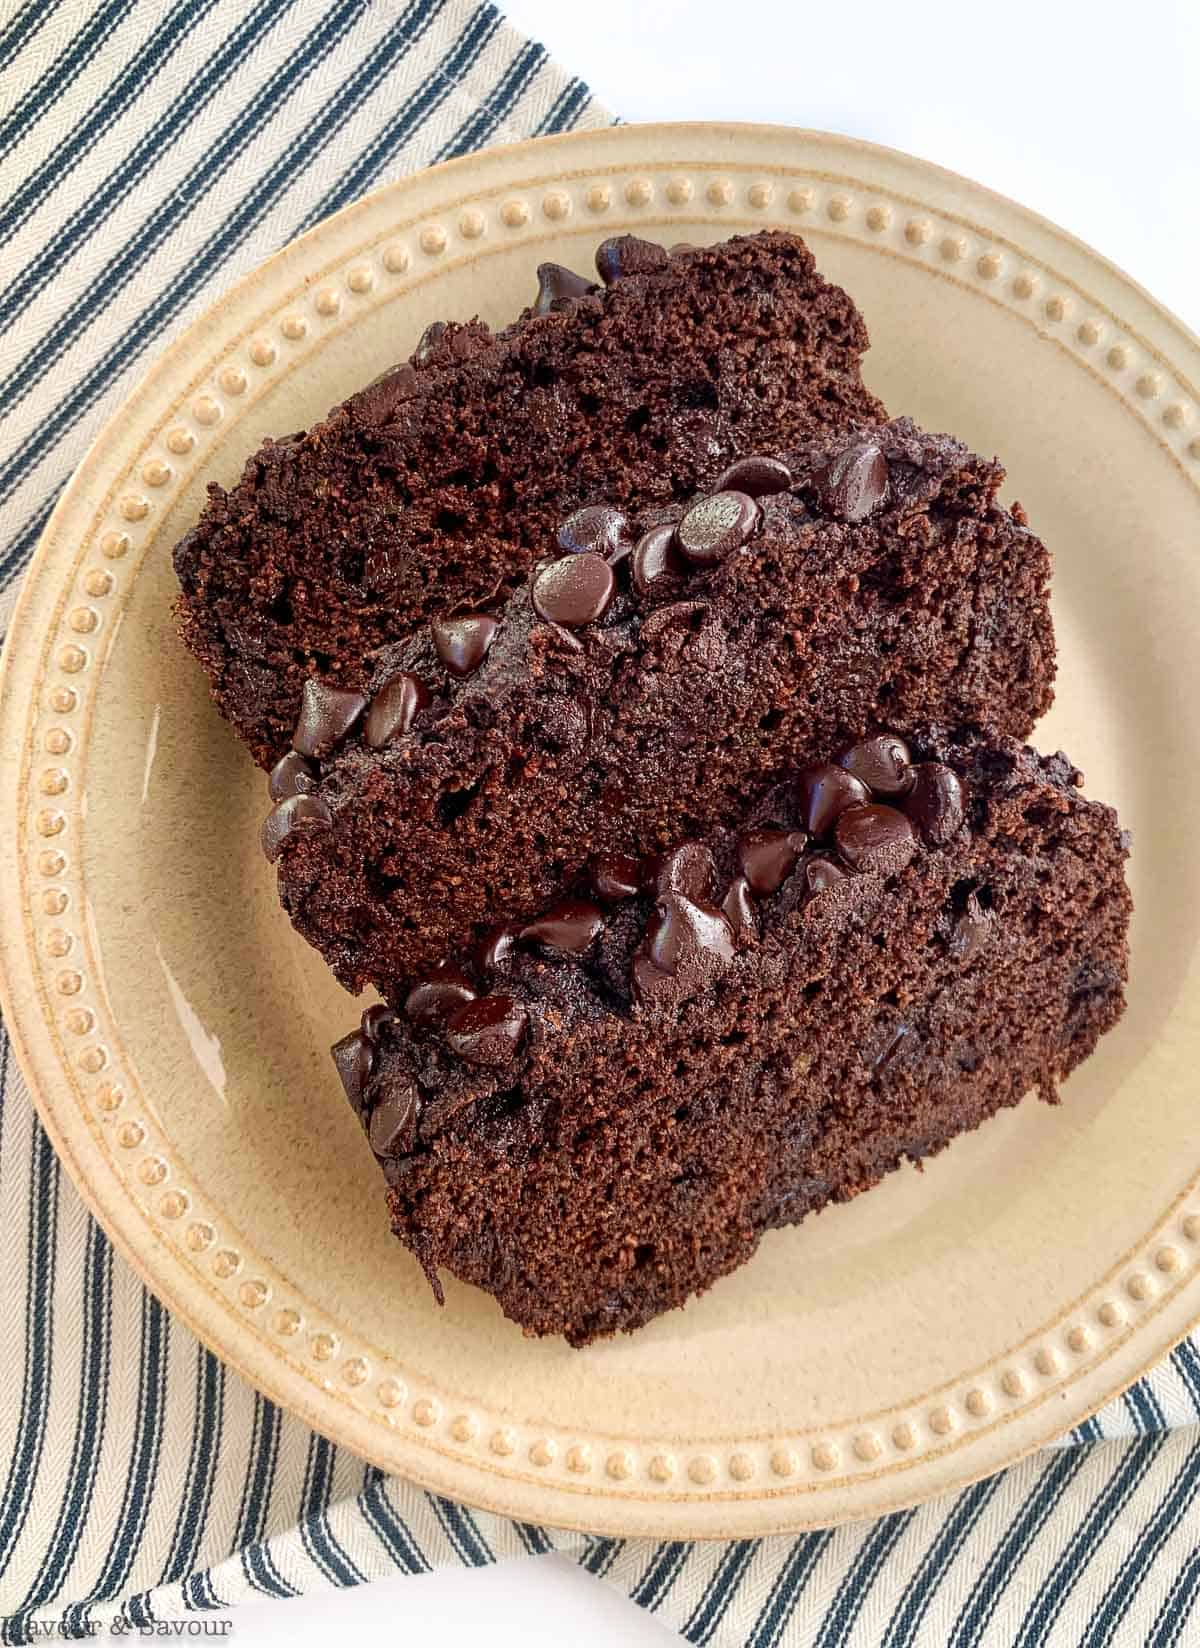 Three slices of Grain-Free Double Chocolate Zucchini Bread on a plate